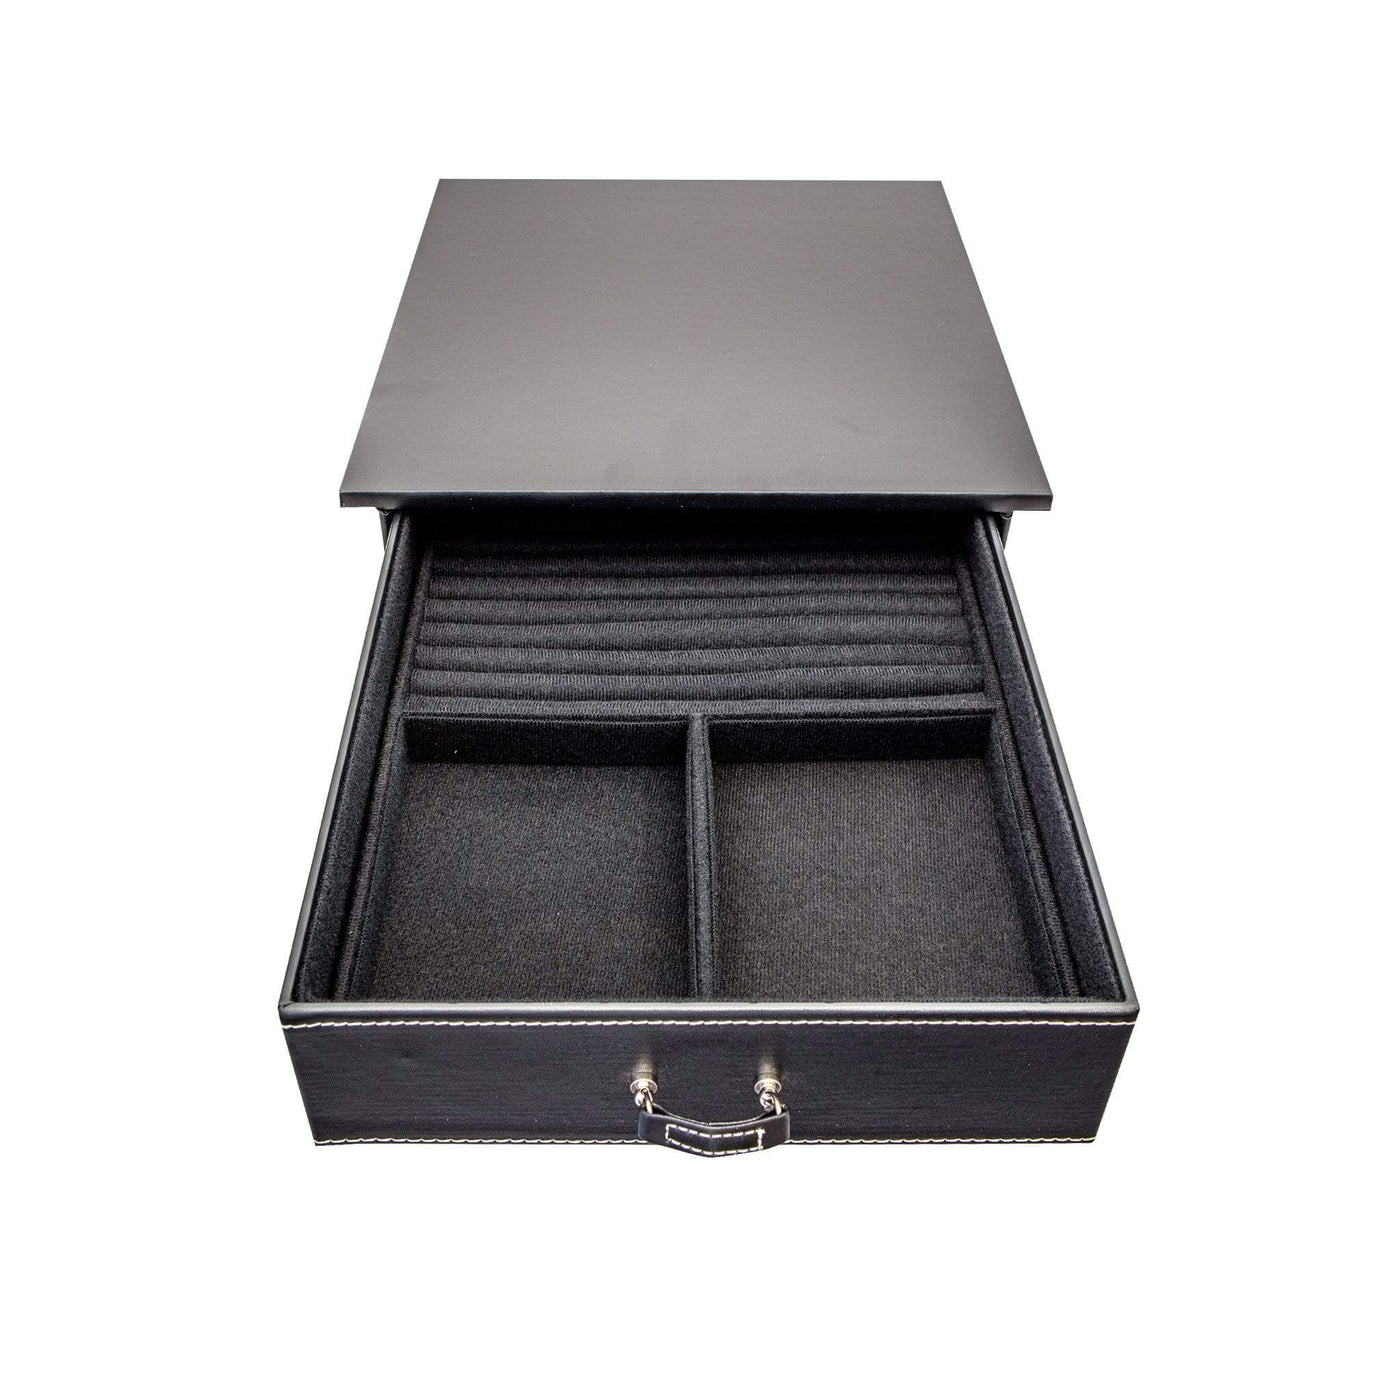 Jewelry Drawer Accessory Liberty Accessory 23 Size Safe or Larger Jewelry Drawer - 8.5" (P/N 10253A)